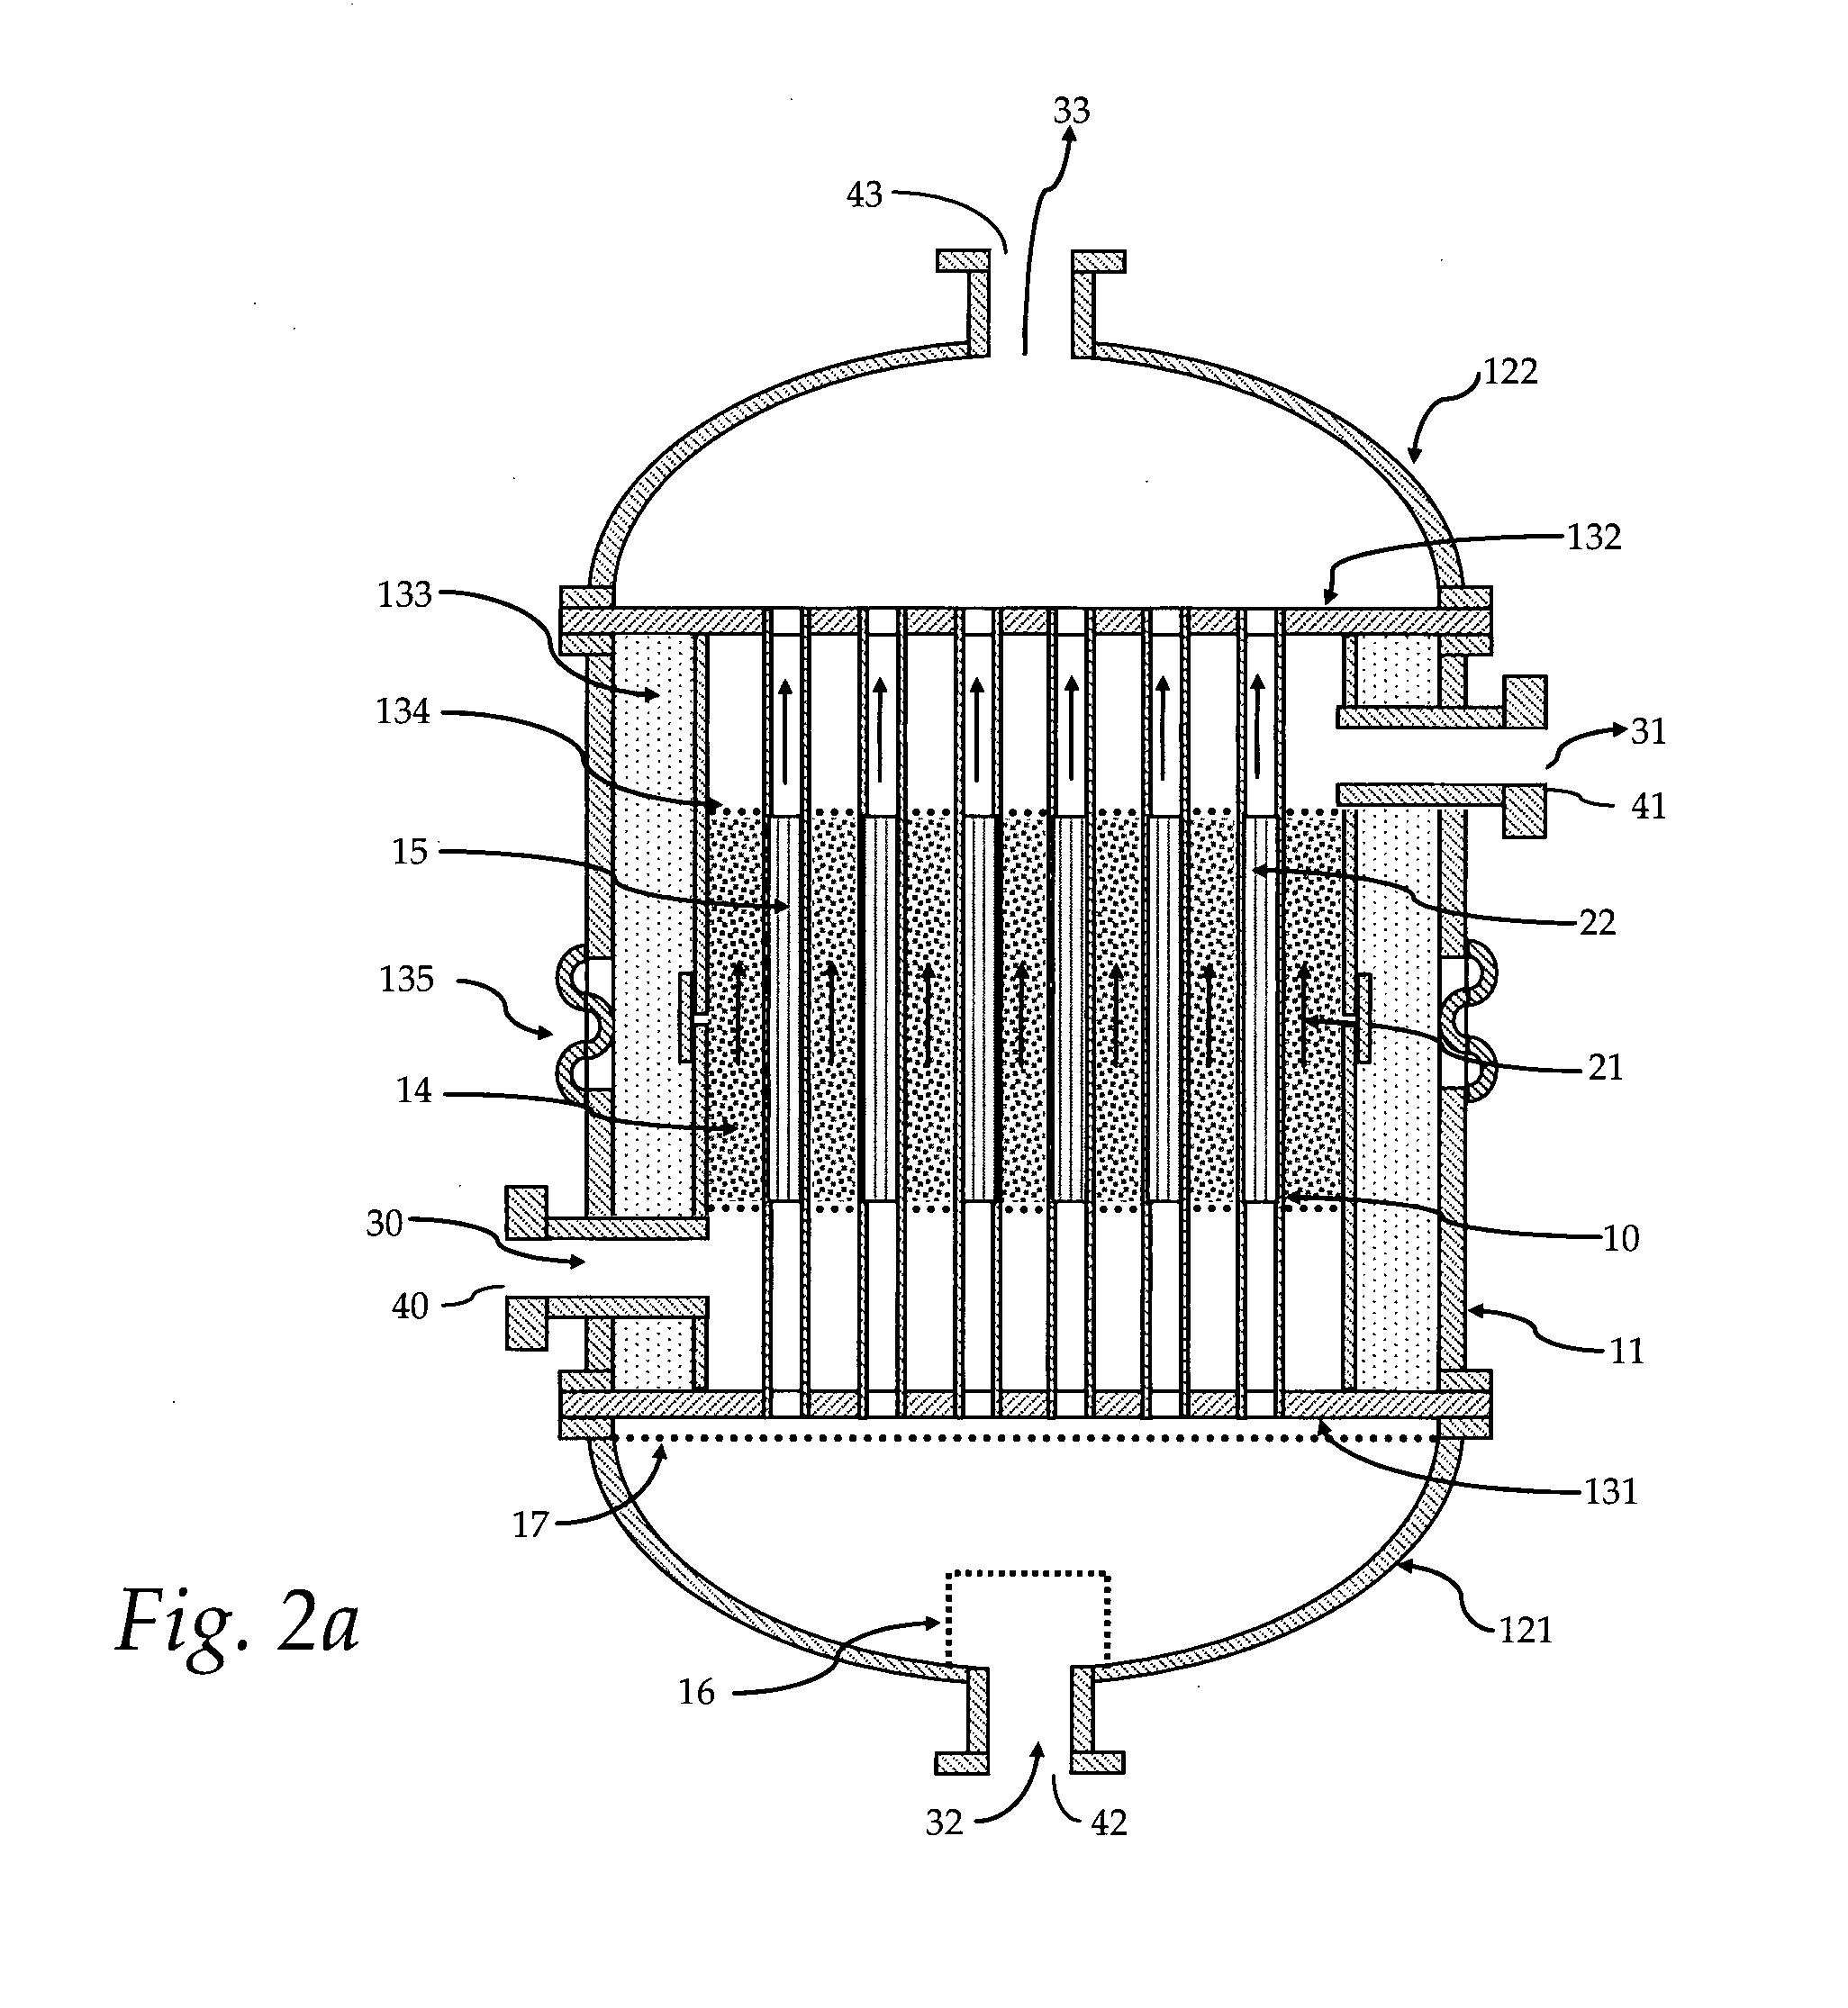 Heat integrated reformer with catalytic combustion for hydrogen production